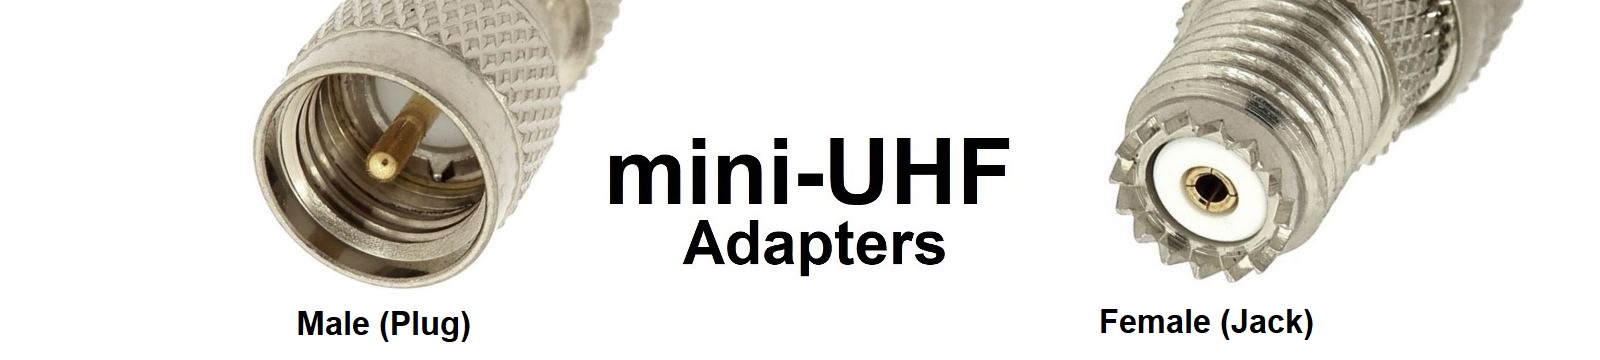 mini-UHF Adapters Category Banner - Max-Gain Systems, Inc.